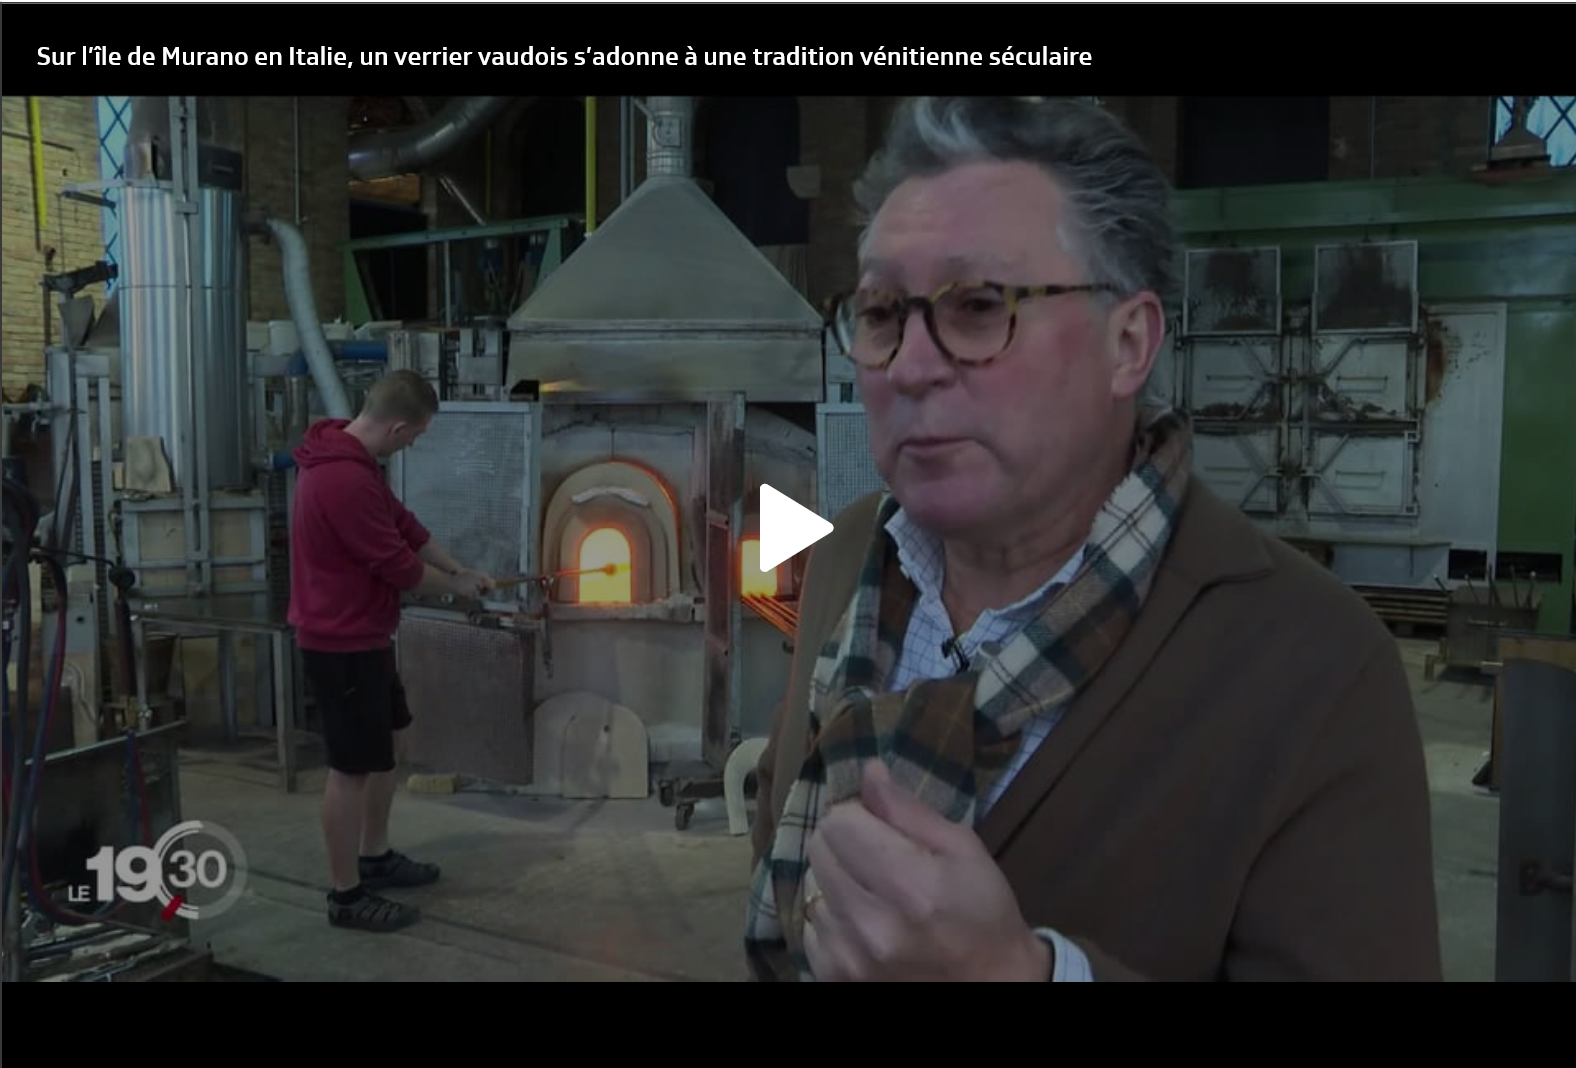 The famous Murano glass furnaces have a glass artist from Château-d’Oex